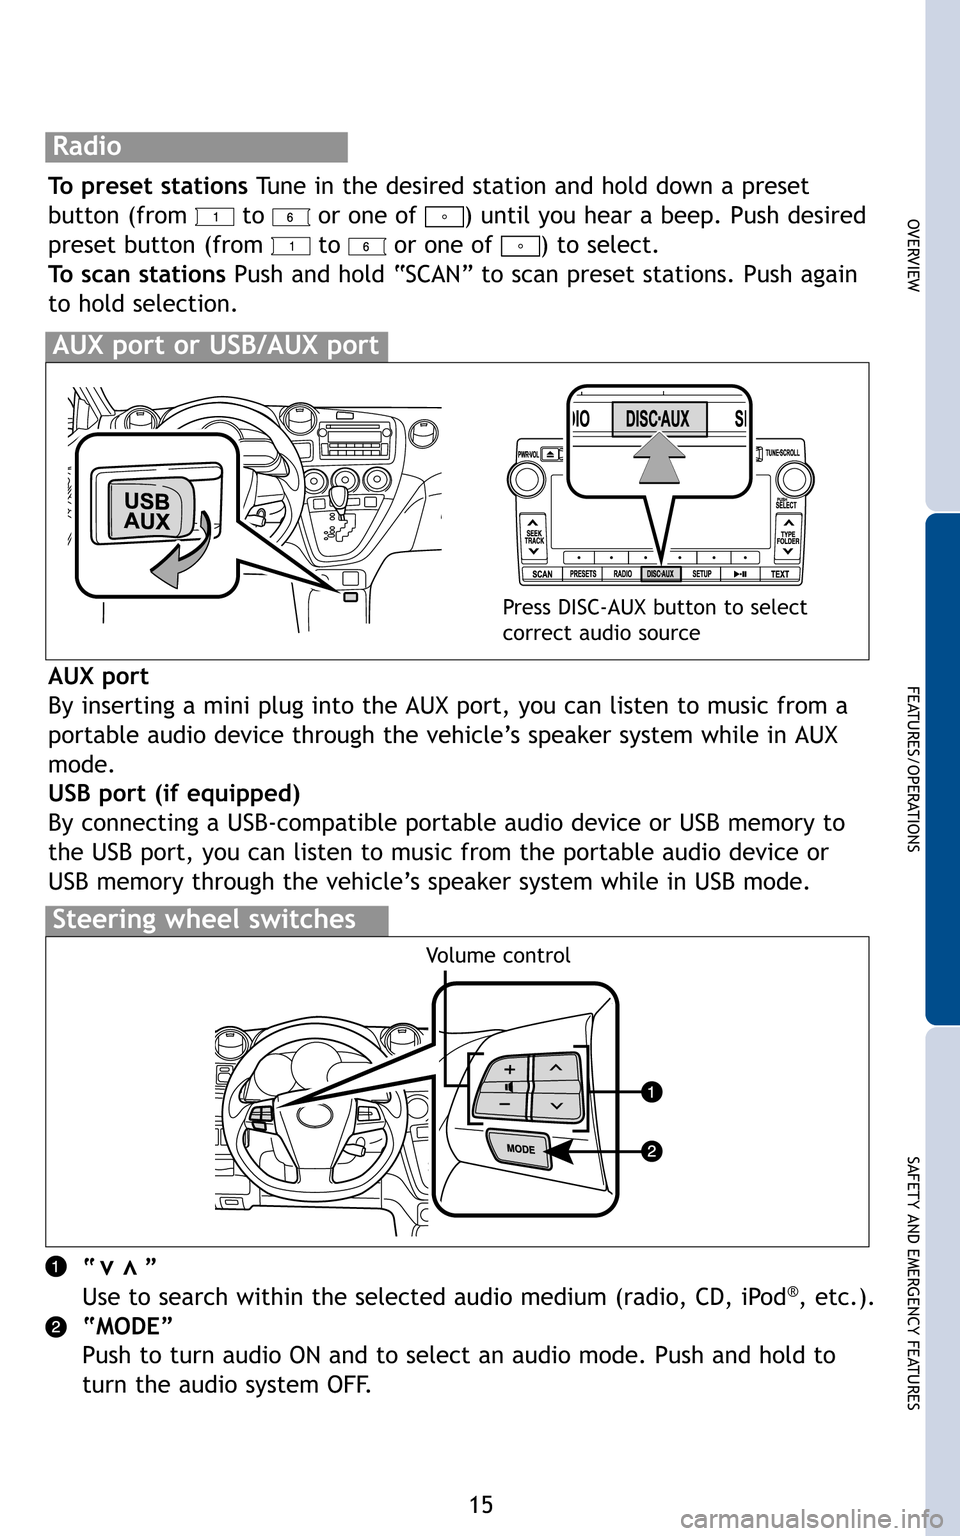 TOYOTA MATRIX 2011 E140 / 2.G Quick Reference Guide 15
OVERVIEW
FEATURES/OPERATIONS
SAFETY AND EMERGENCY FEATURES

To preset stations Tune in the desired station and hold down a preset 
button (from  to  or one of  ) until you hear a beep. Push desired